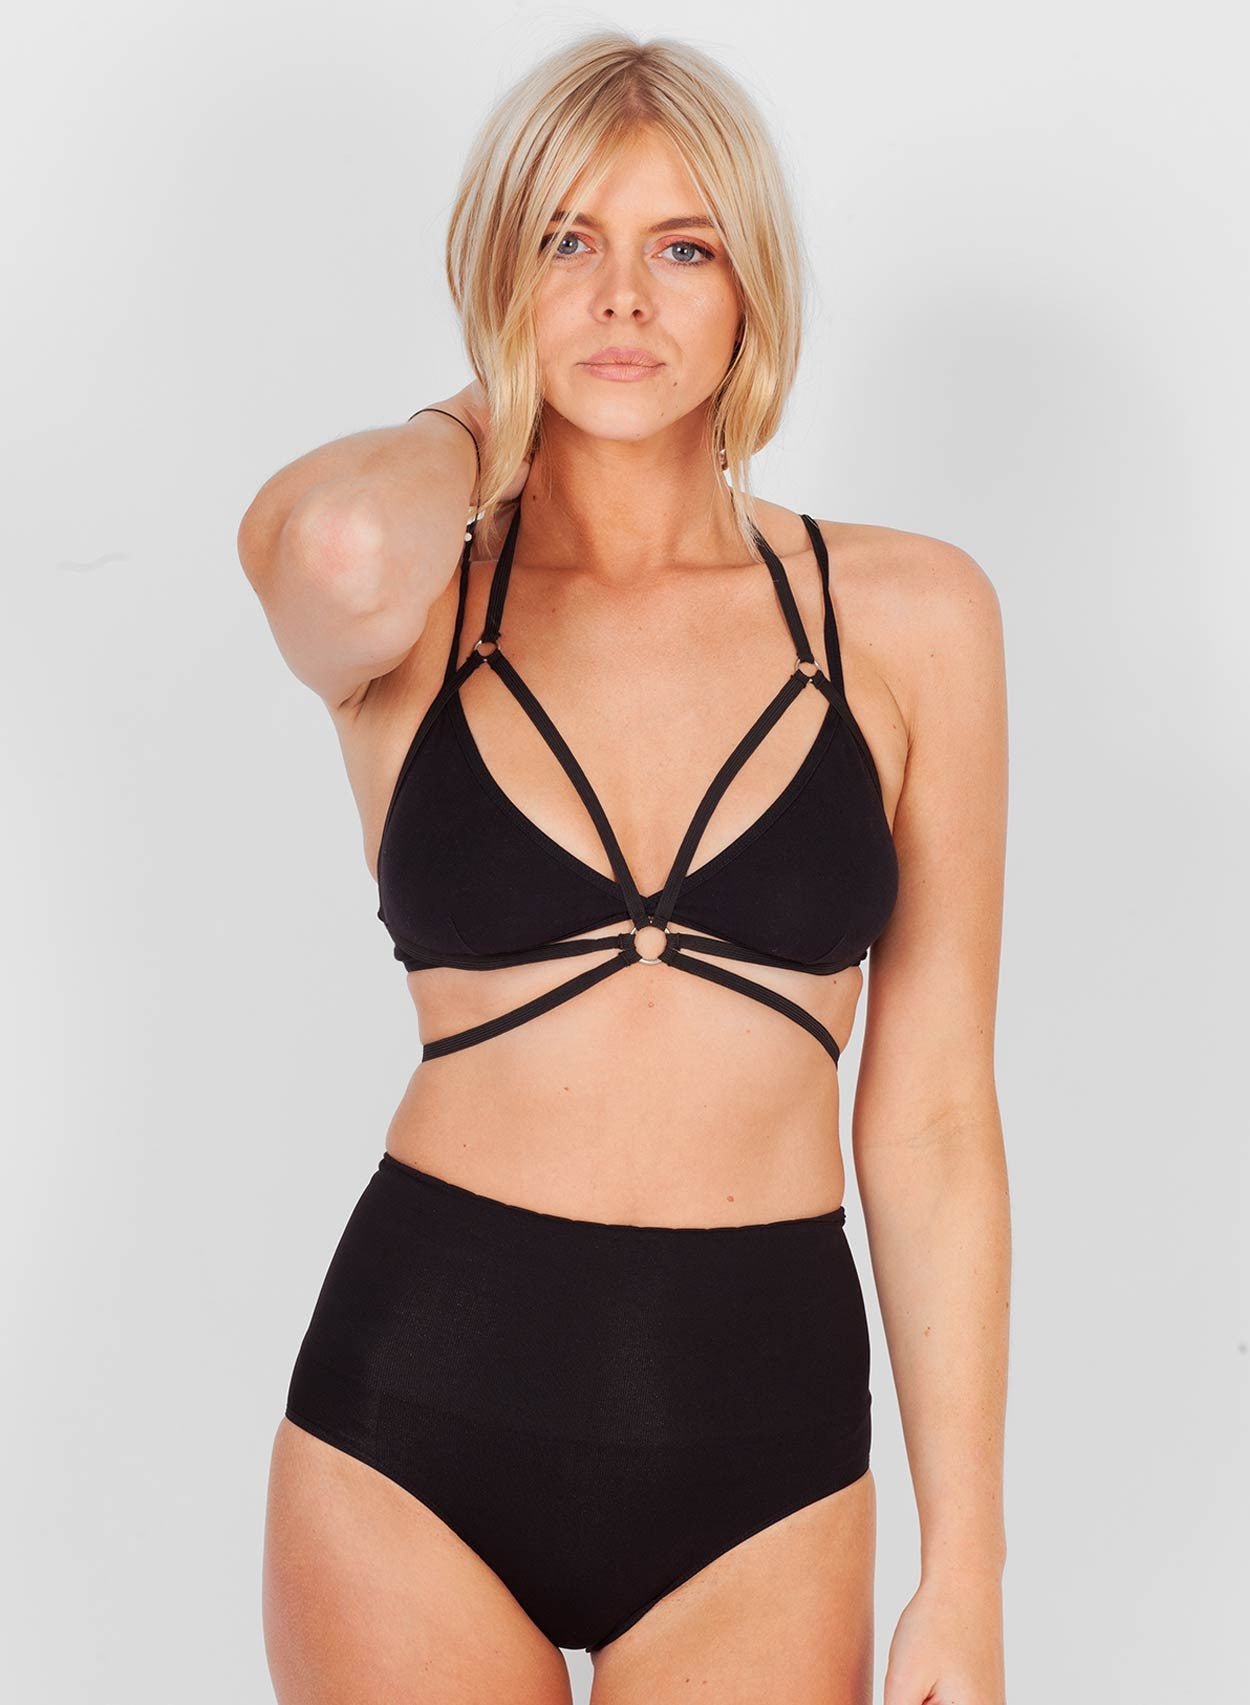 Love Chara Harness - LoveClothing.com - 3